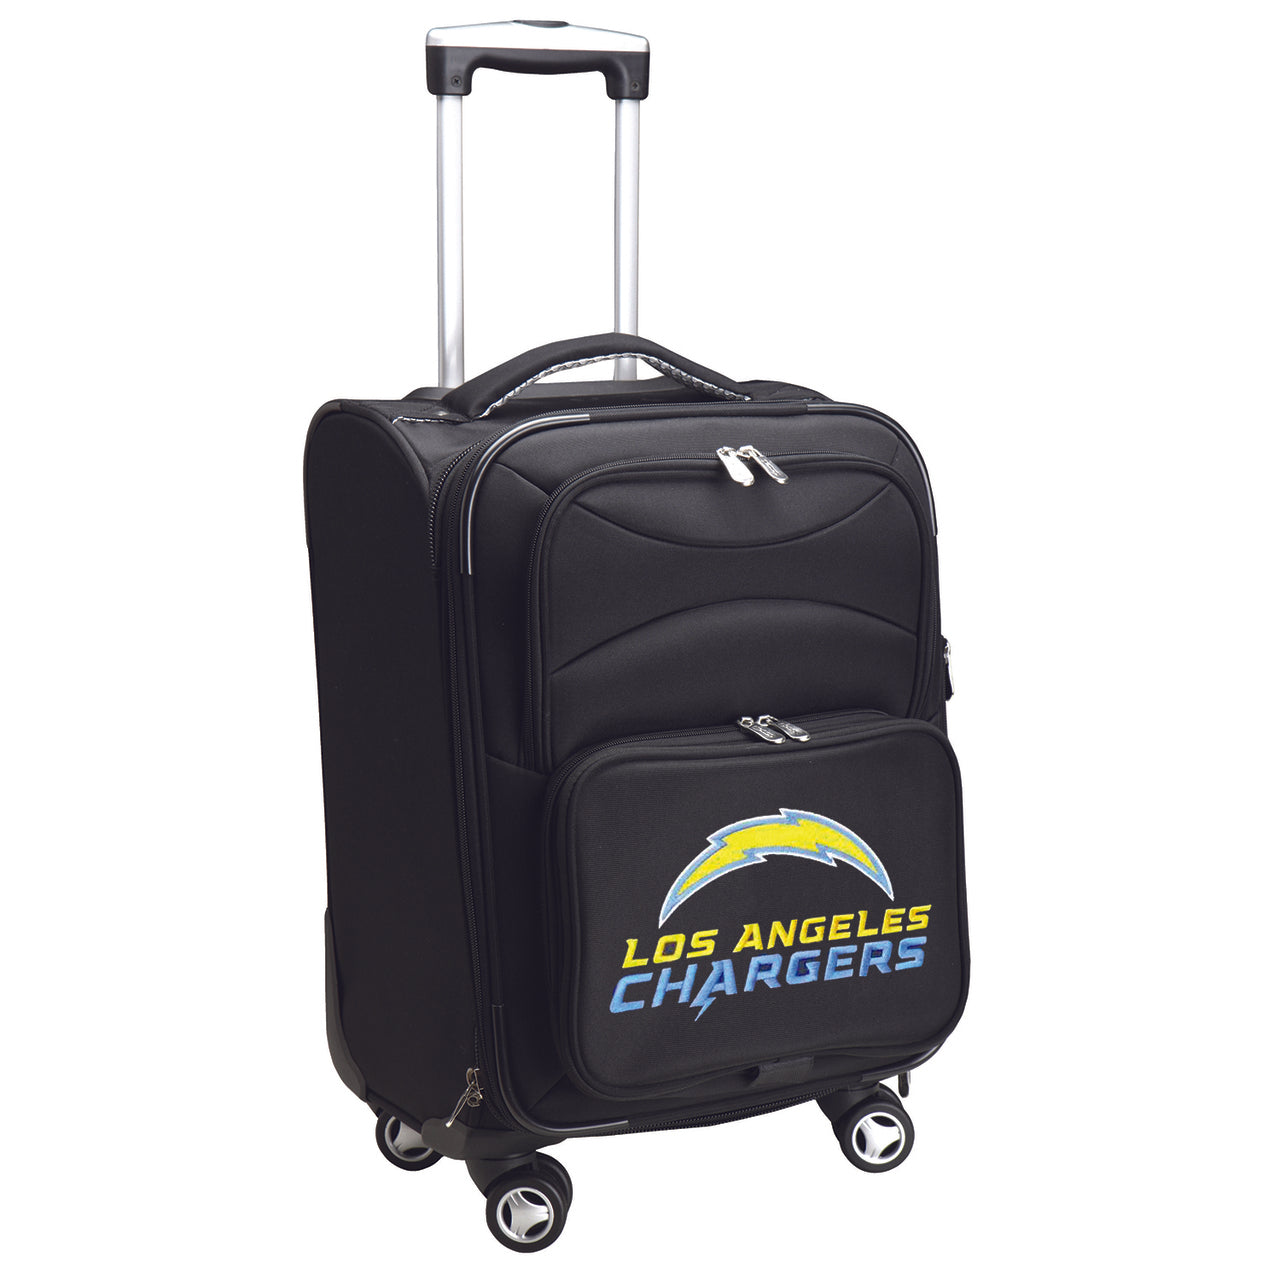 Los angeles Chargers 21" Softsided Luggage Carry-on Spinner in Black